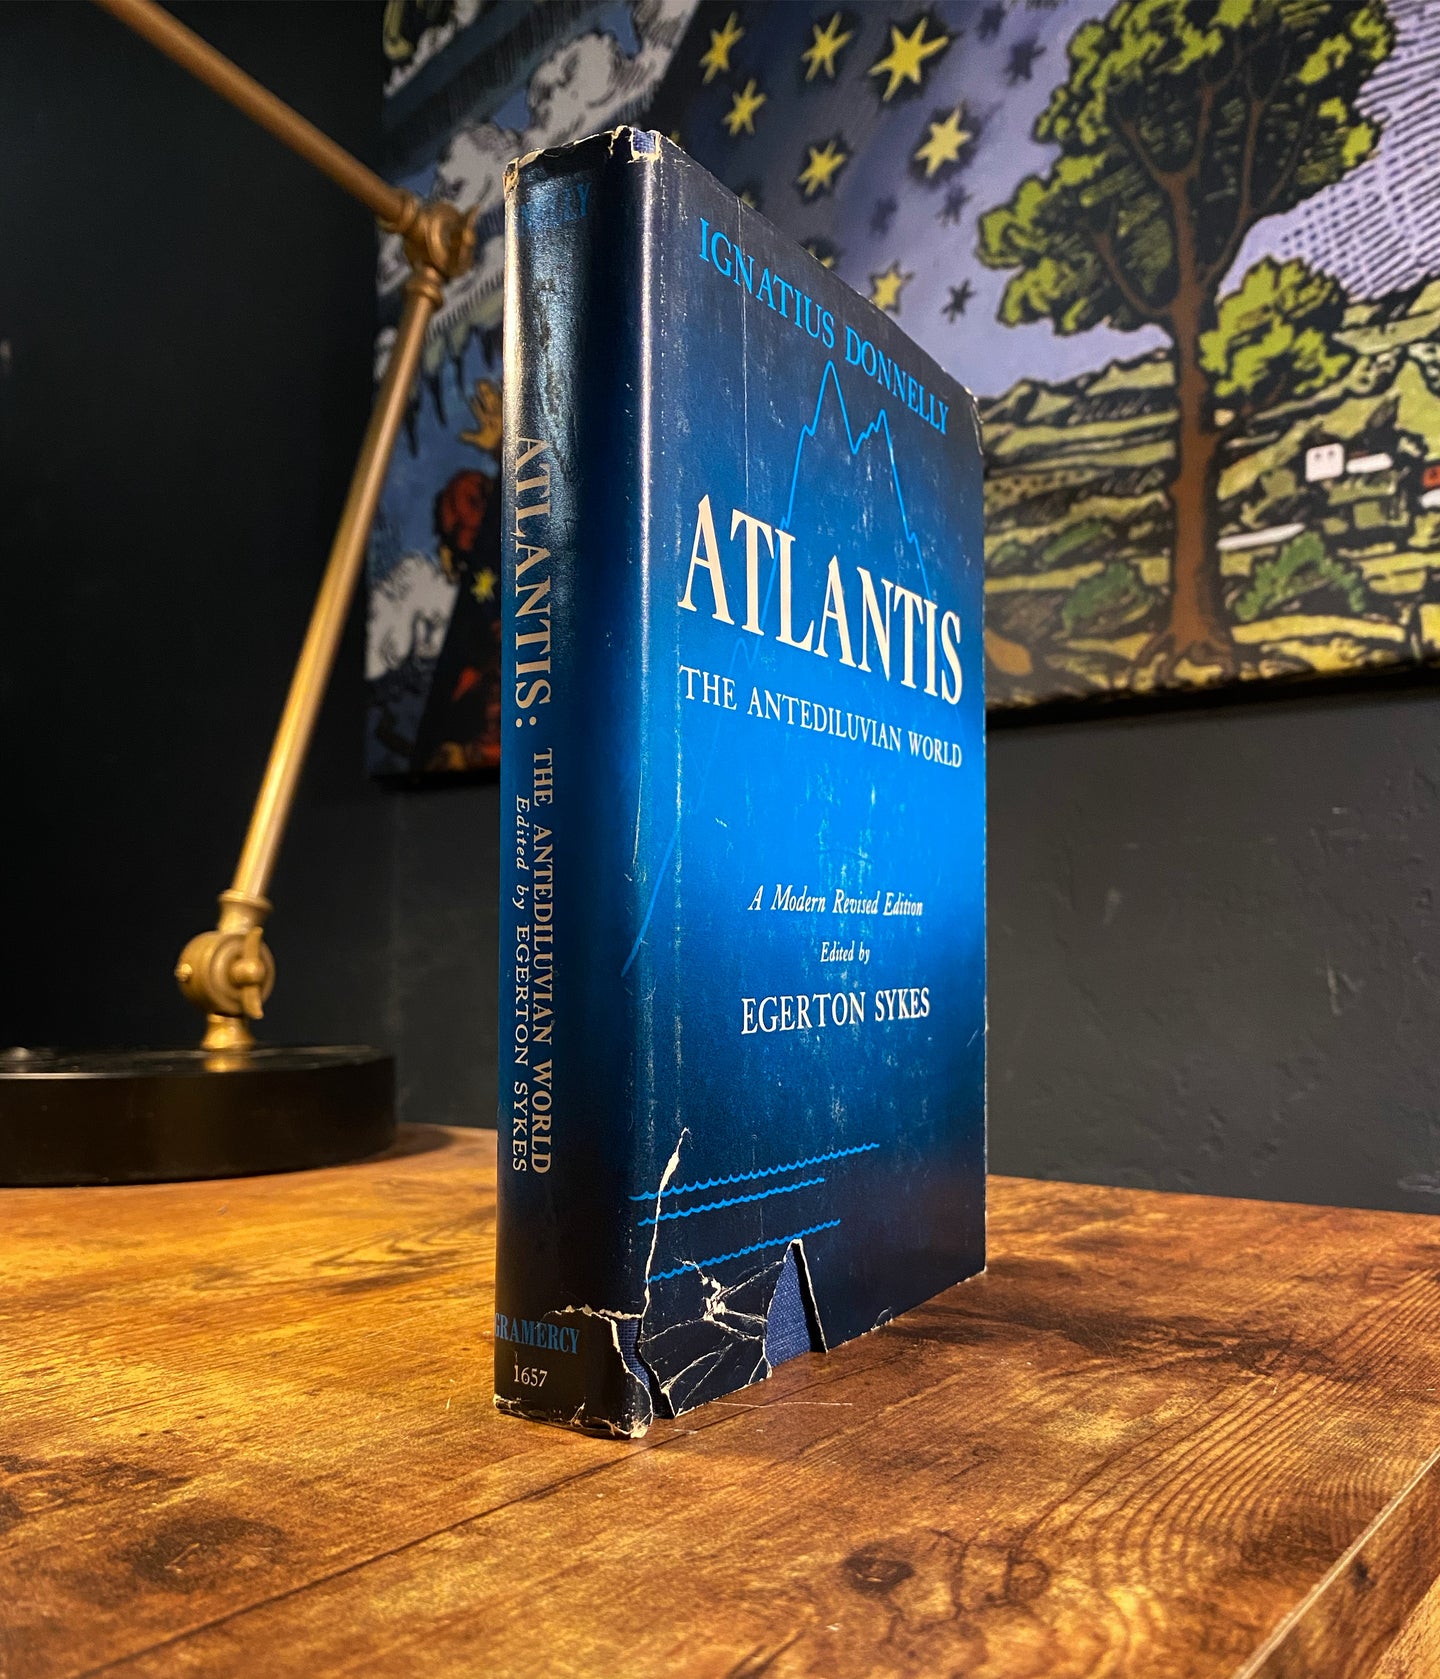 Atlantis by Ignatius Donnelly